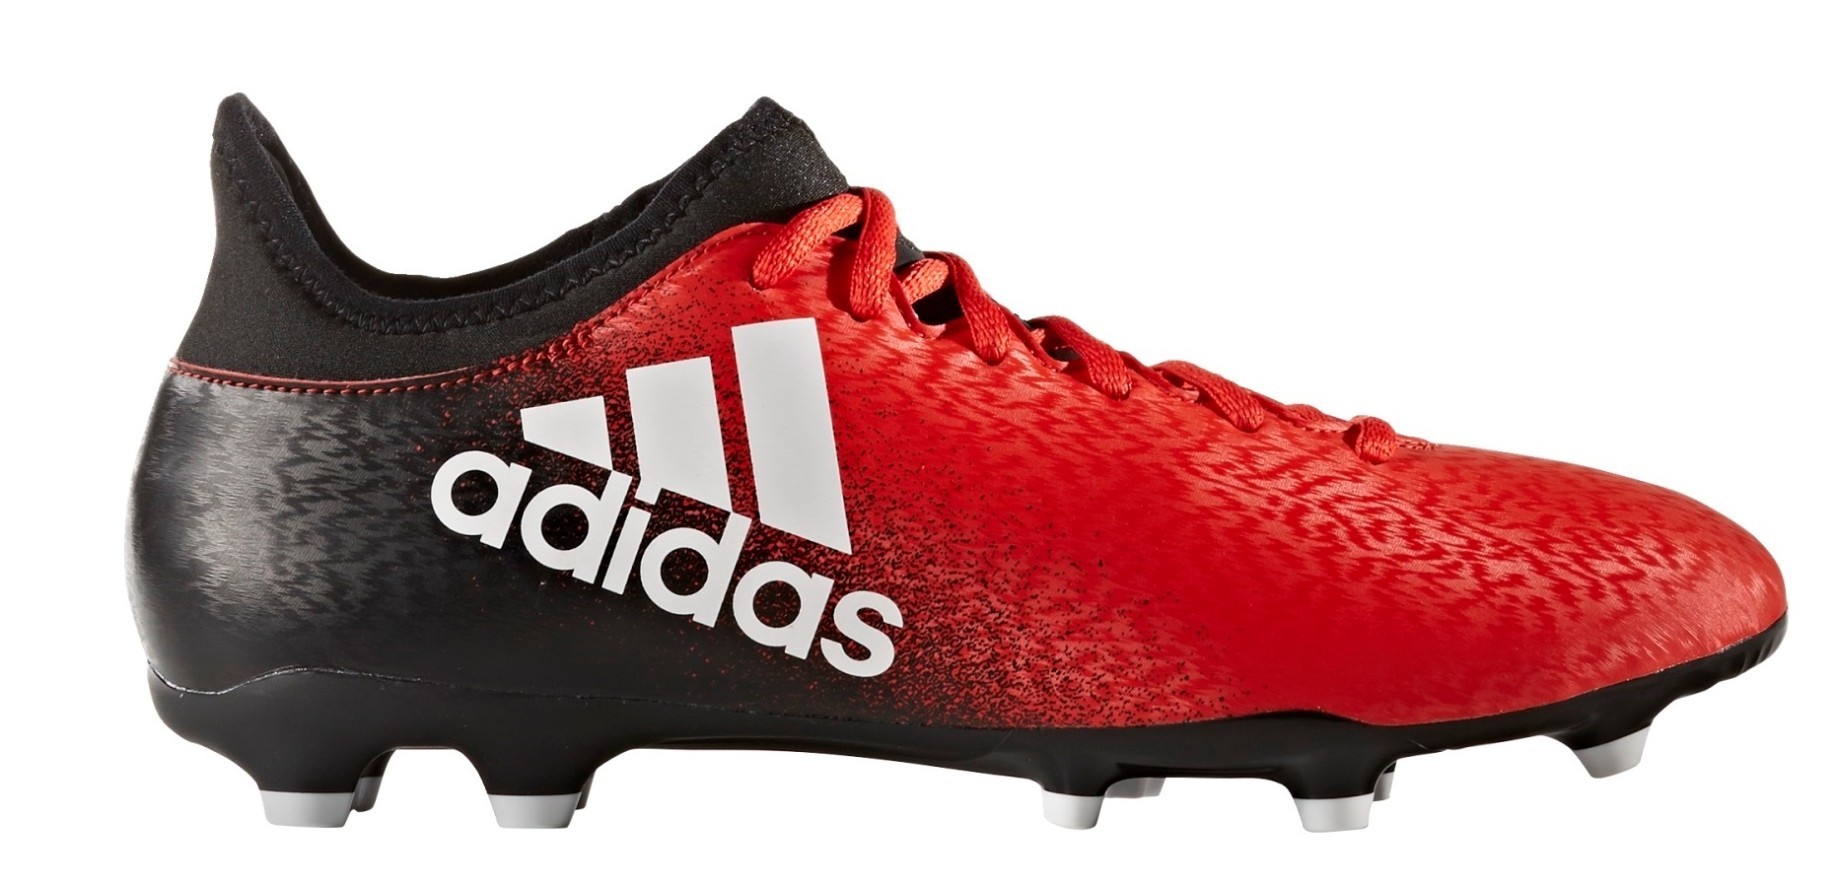 Football boots Adidas X 16.3 FG Red Limit Pack colore Red Black - Adidas -  SportIT.com